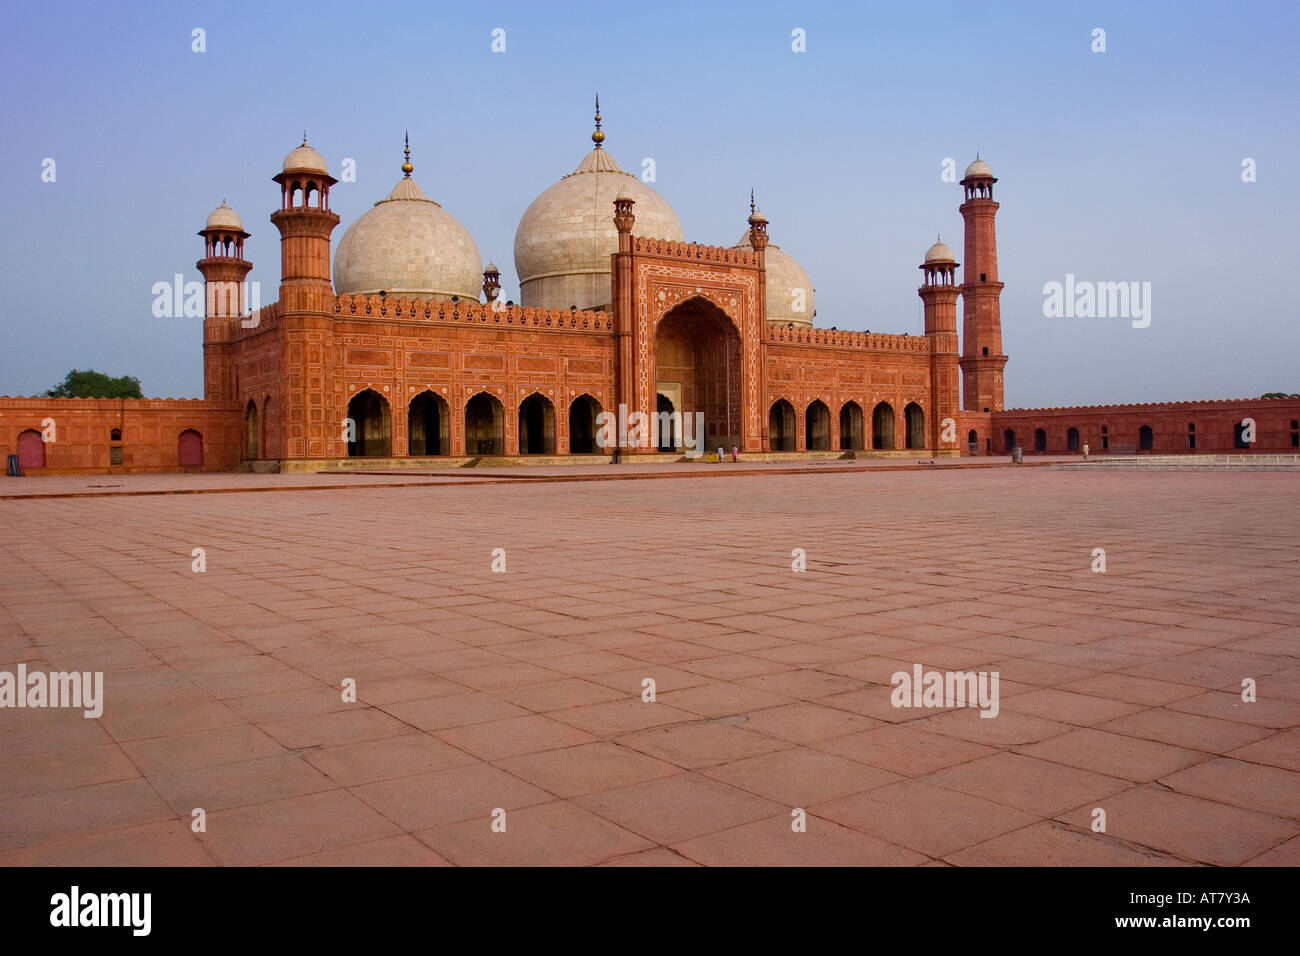 Detail of the moghul style facade of the Badshahi Mosque Lahore Pakistan  Stock Photo - Alamy